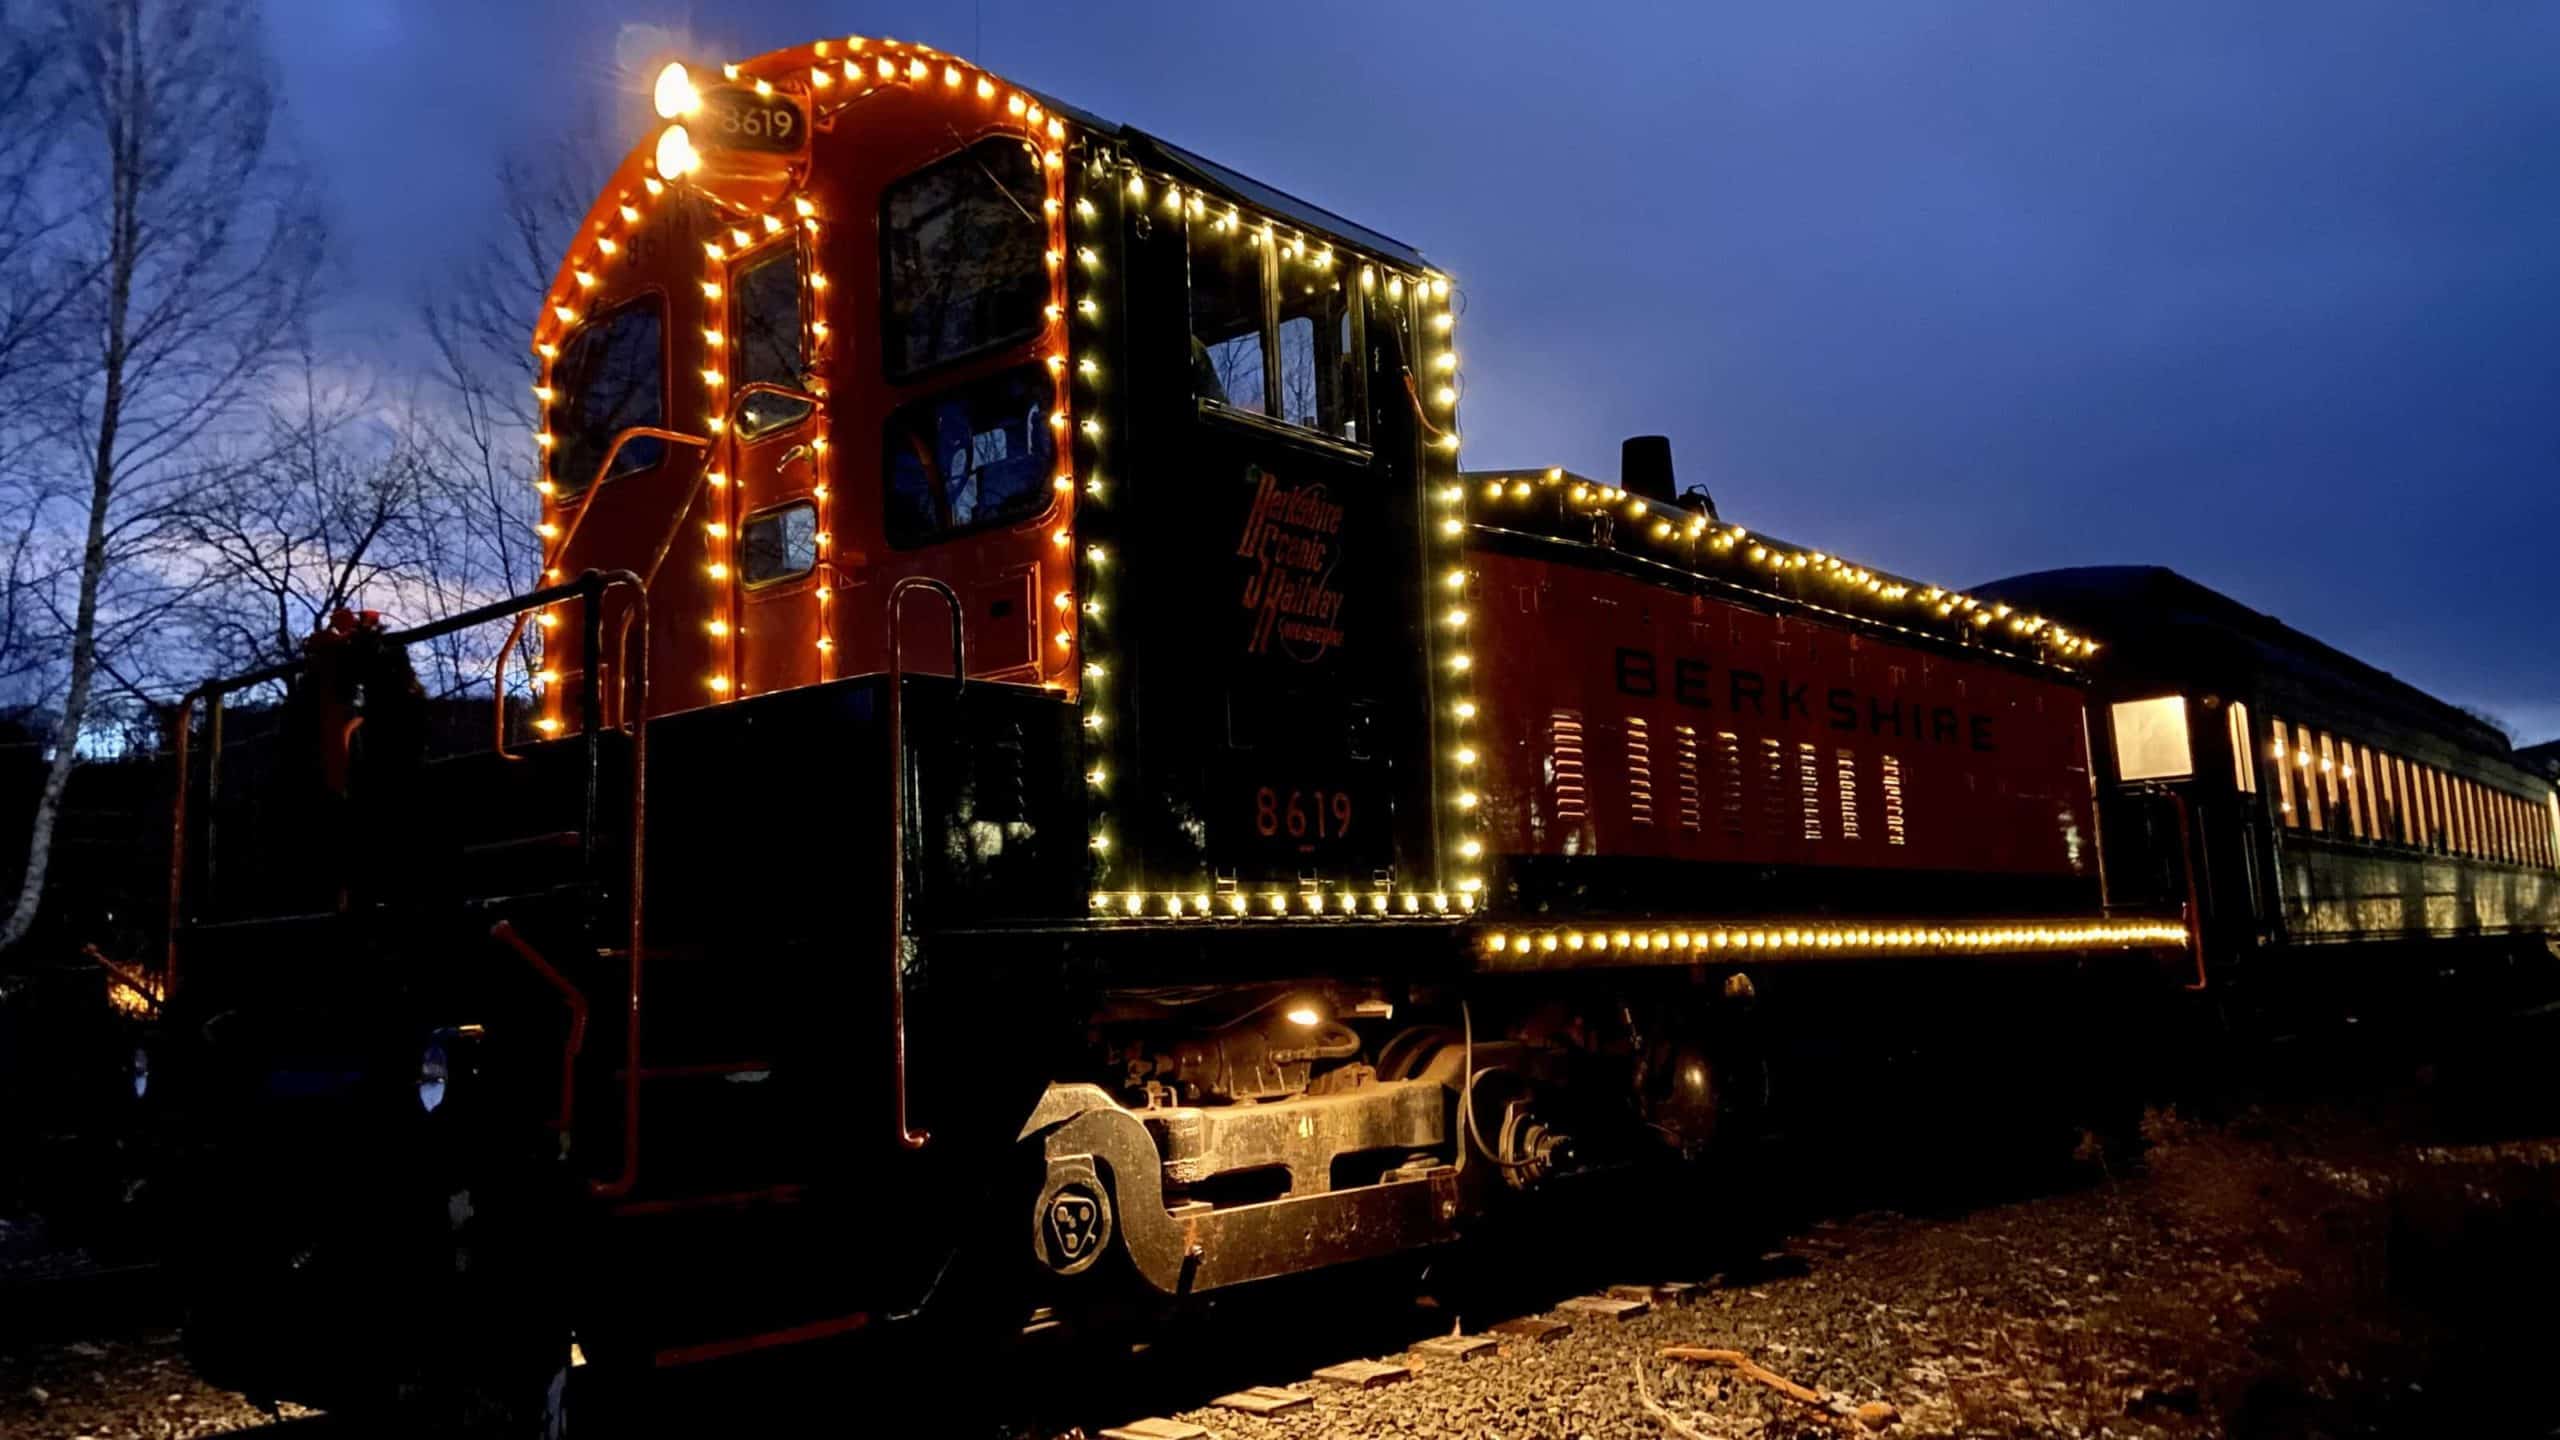 Holiday trains are running on the Hoosac Valley Line. Press image courtesy of Berkshire Scenic Railway.